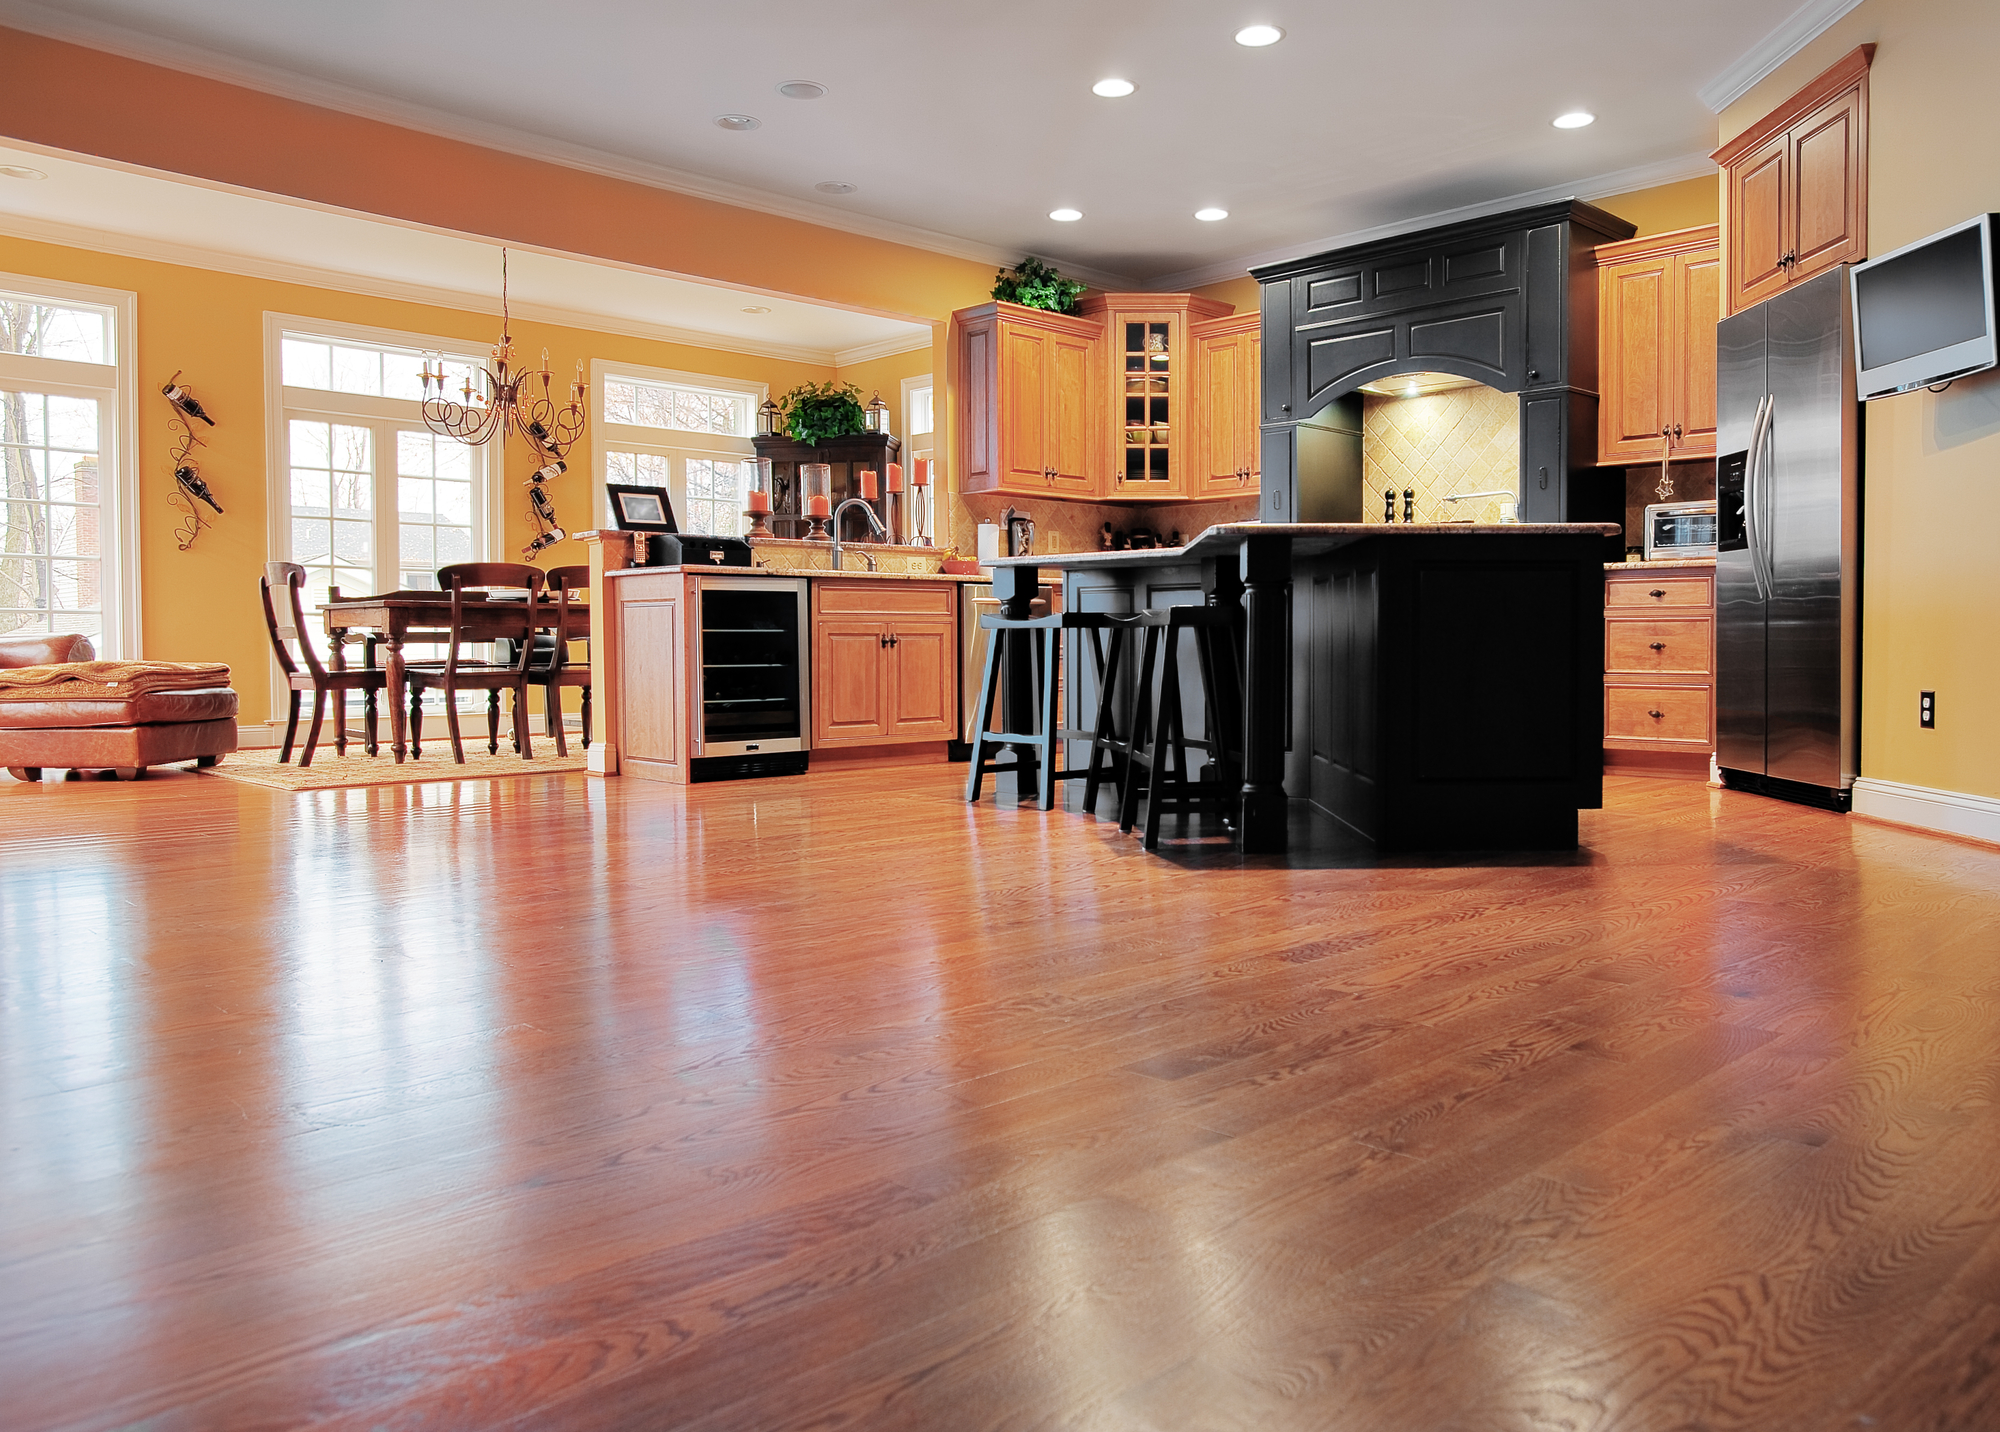 How Long Should You Wait To Use Your Floor After Refinishing It